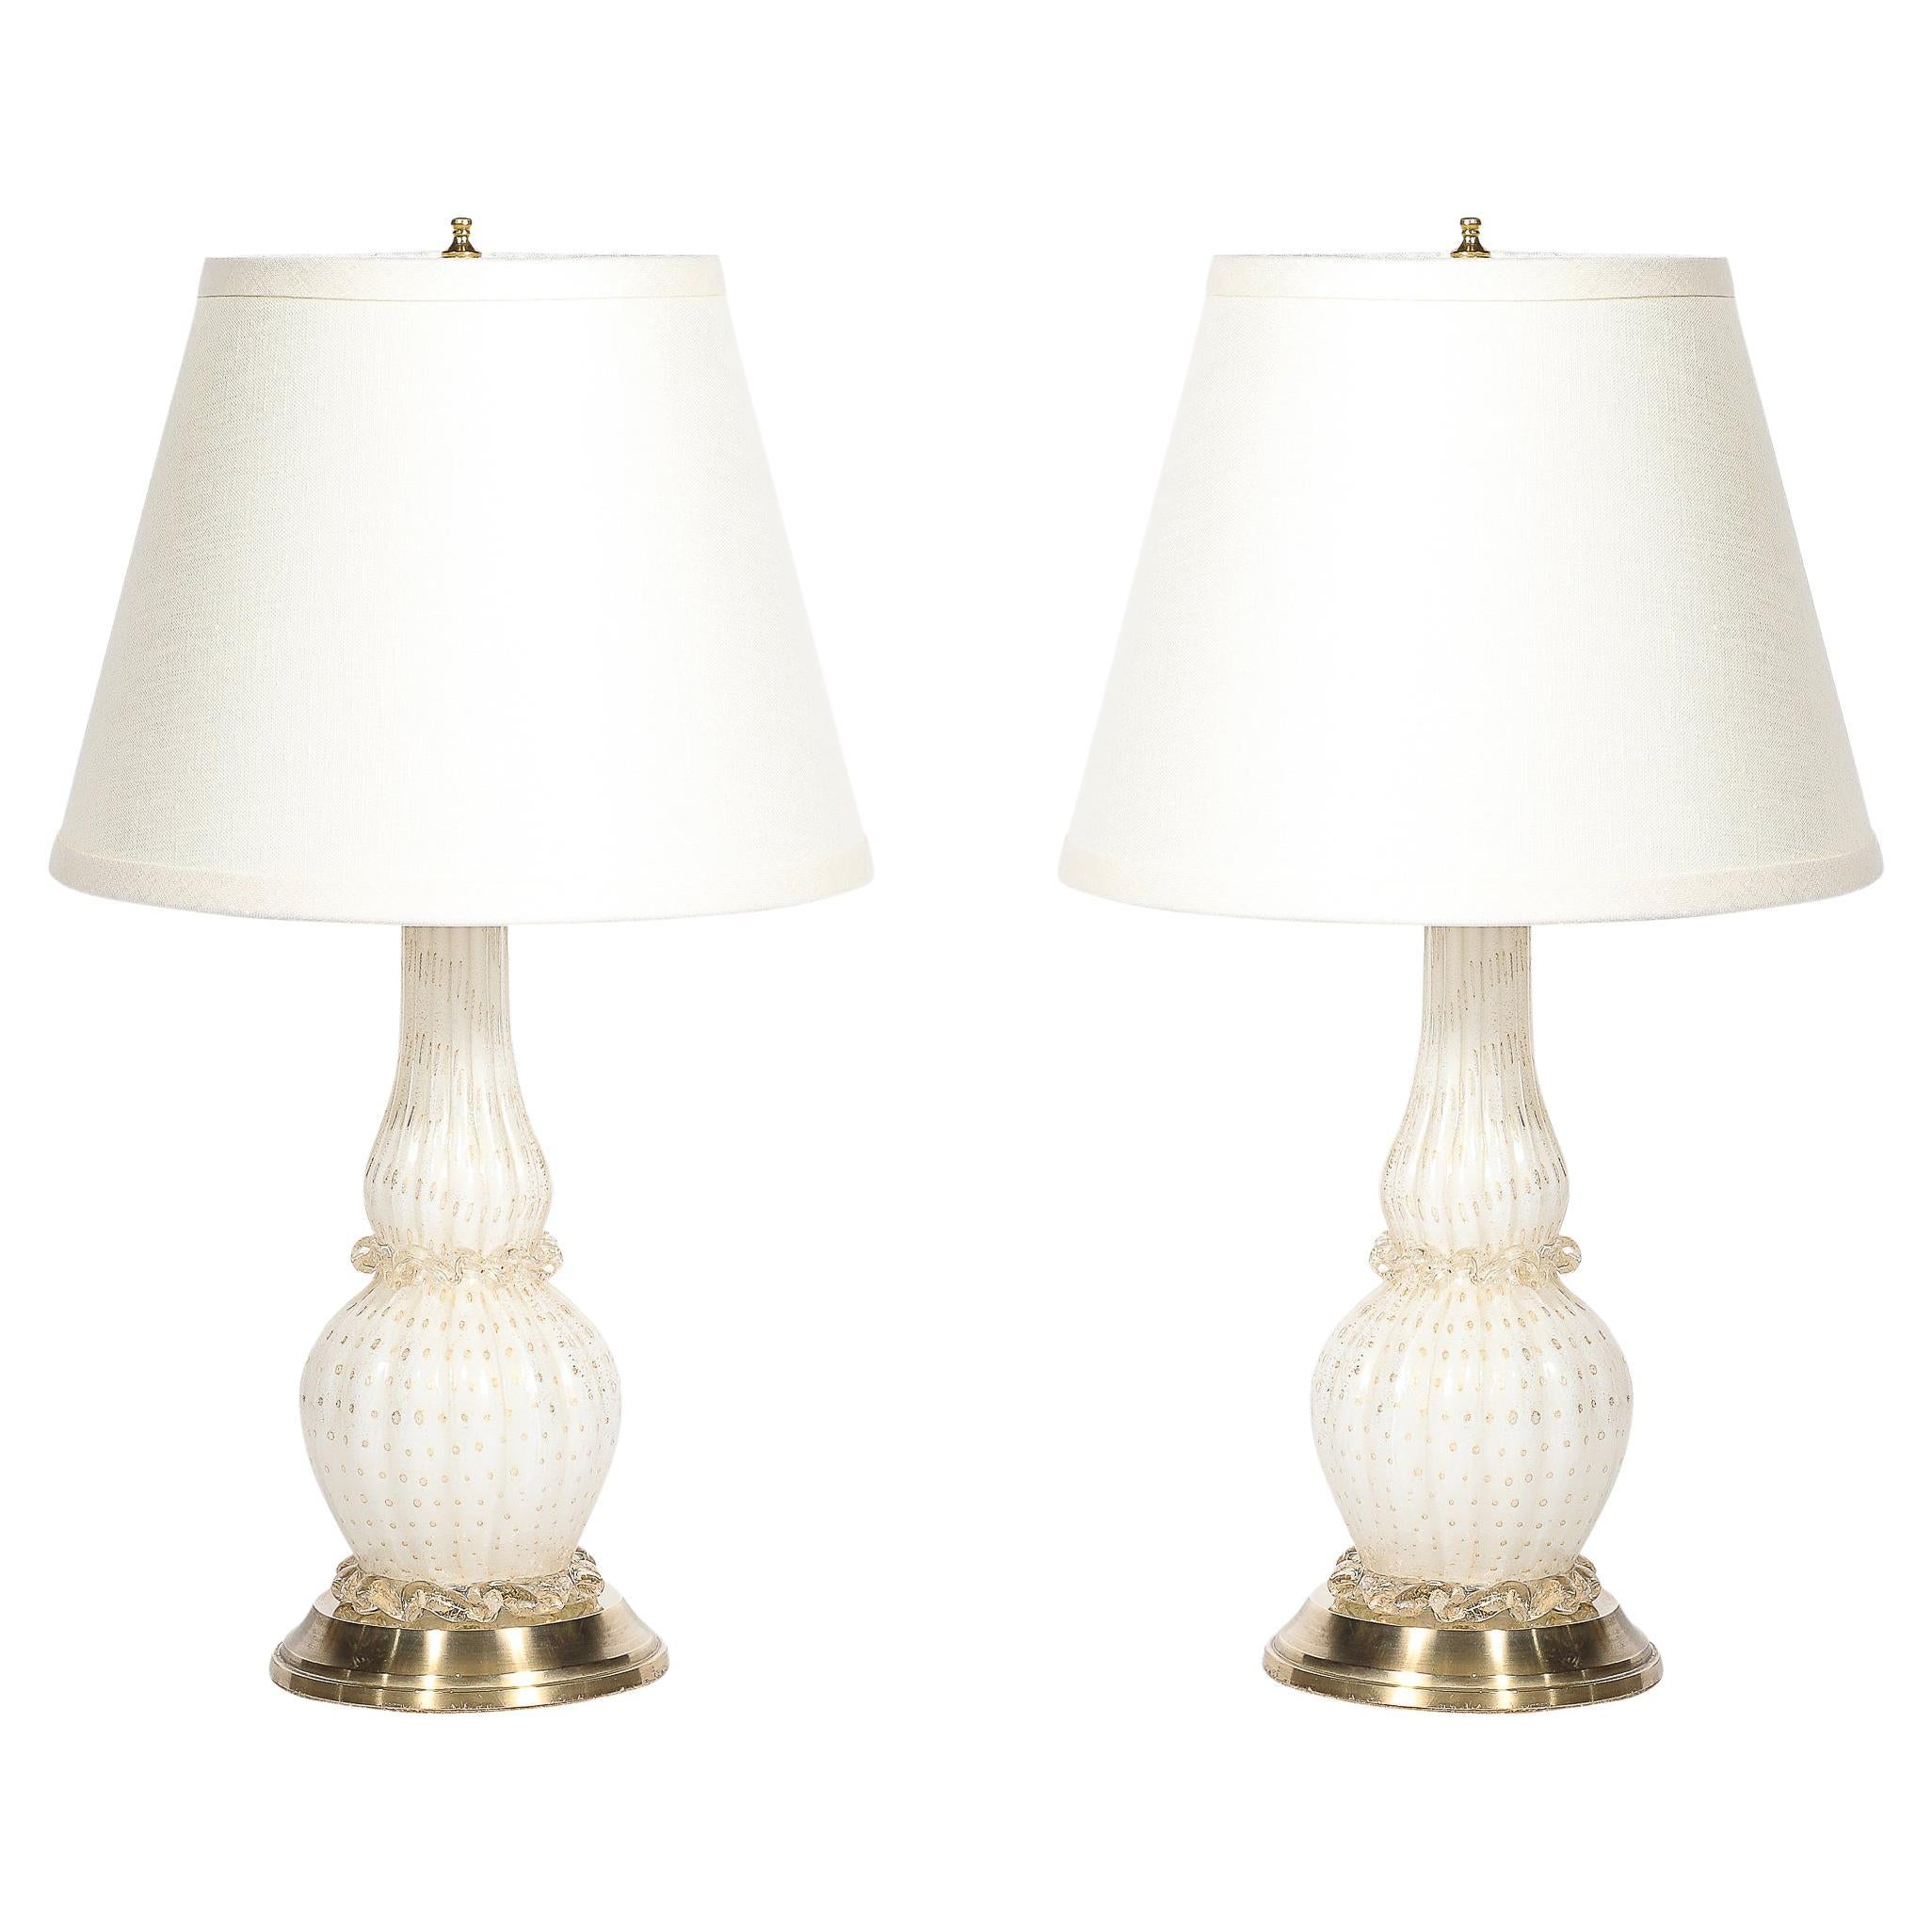 Pair of Mid-Century Modernist Hand-Blown White Murano Glass & Brass Table Lamps